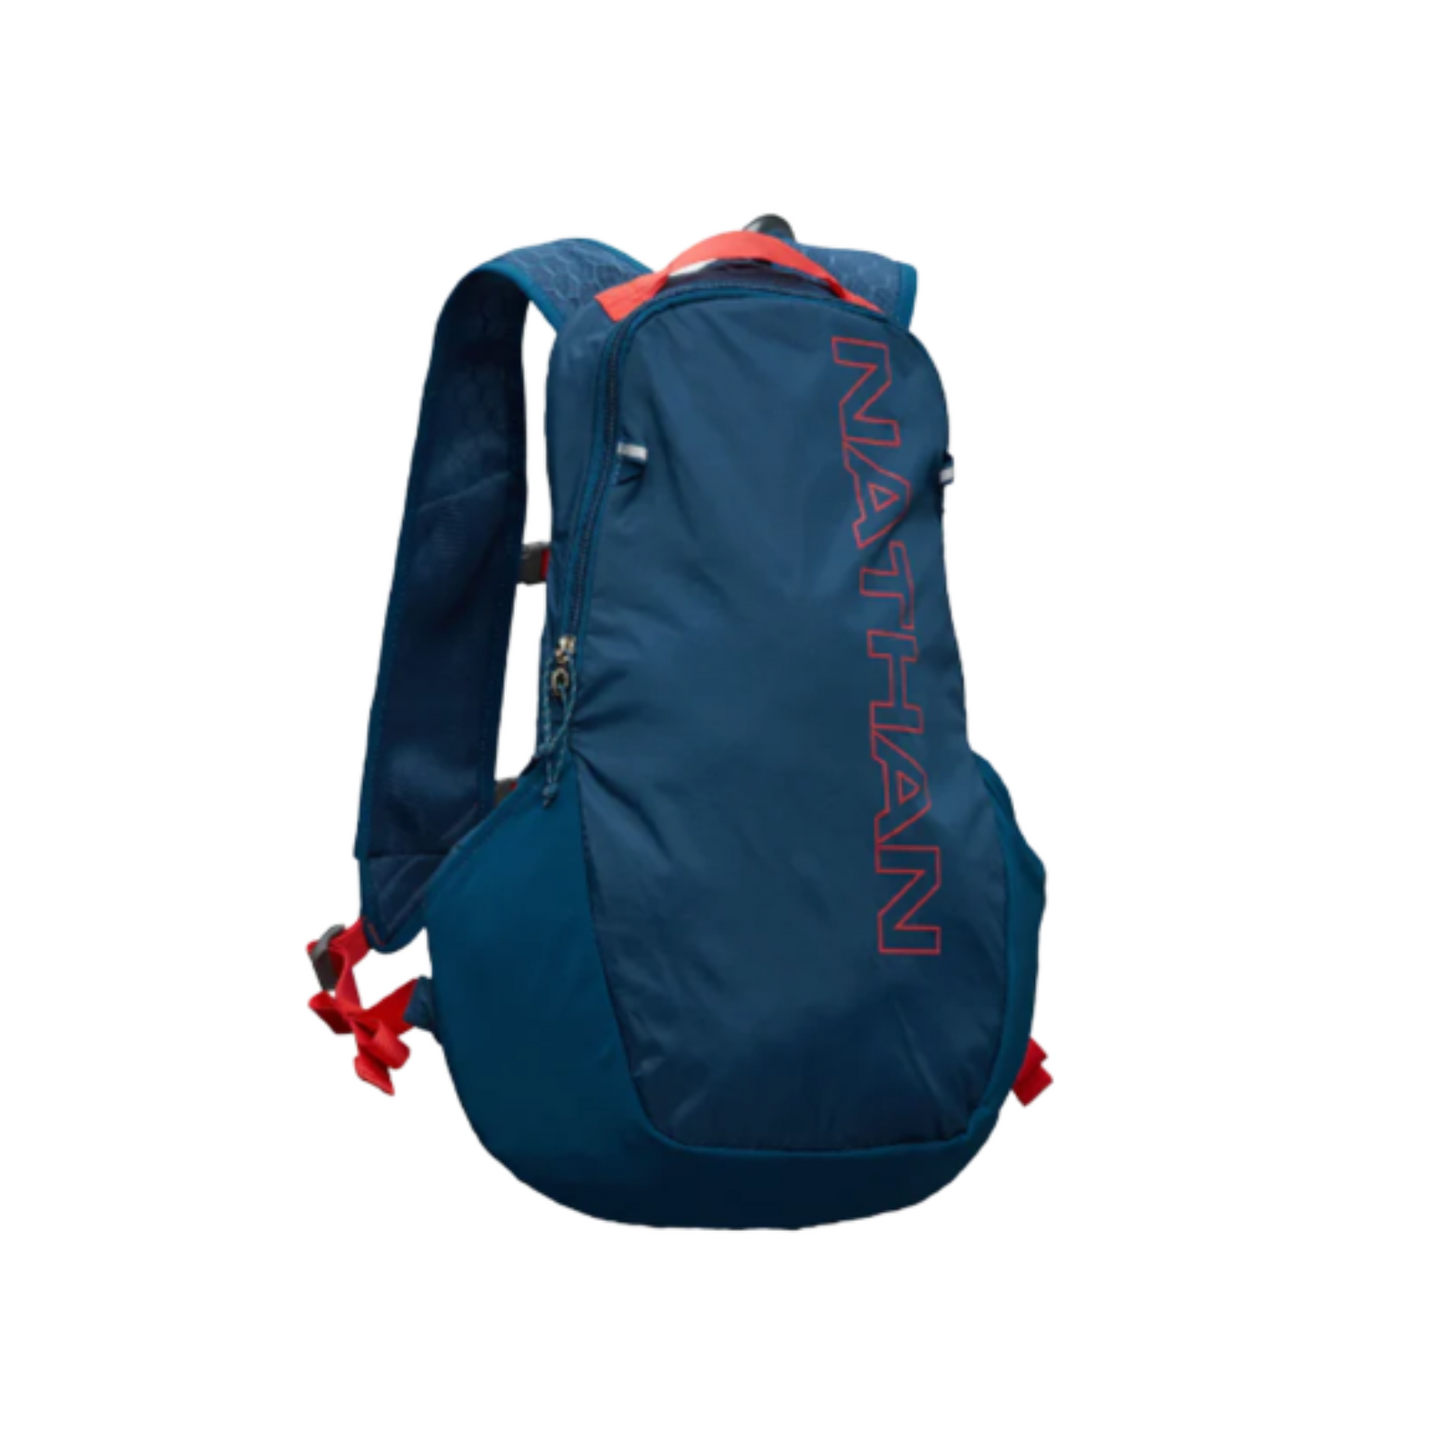 Nathan Crossover Backpack 5L